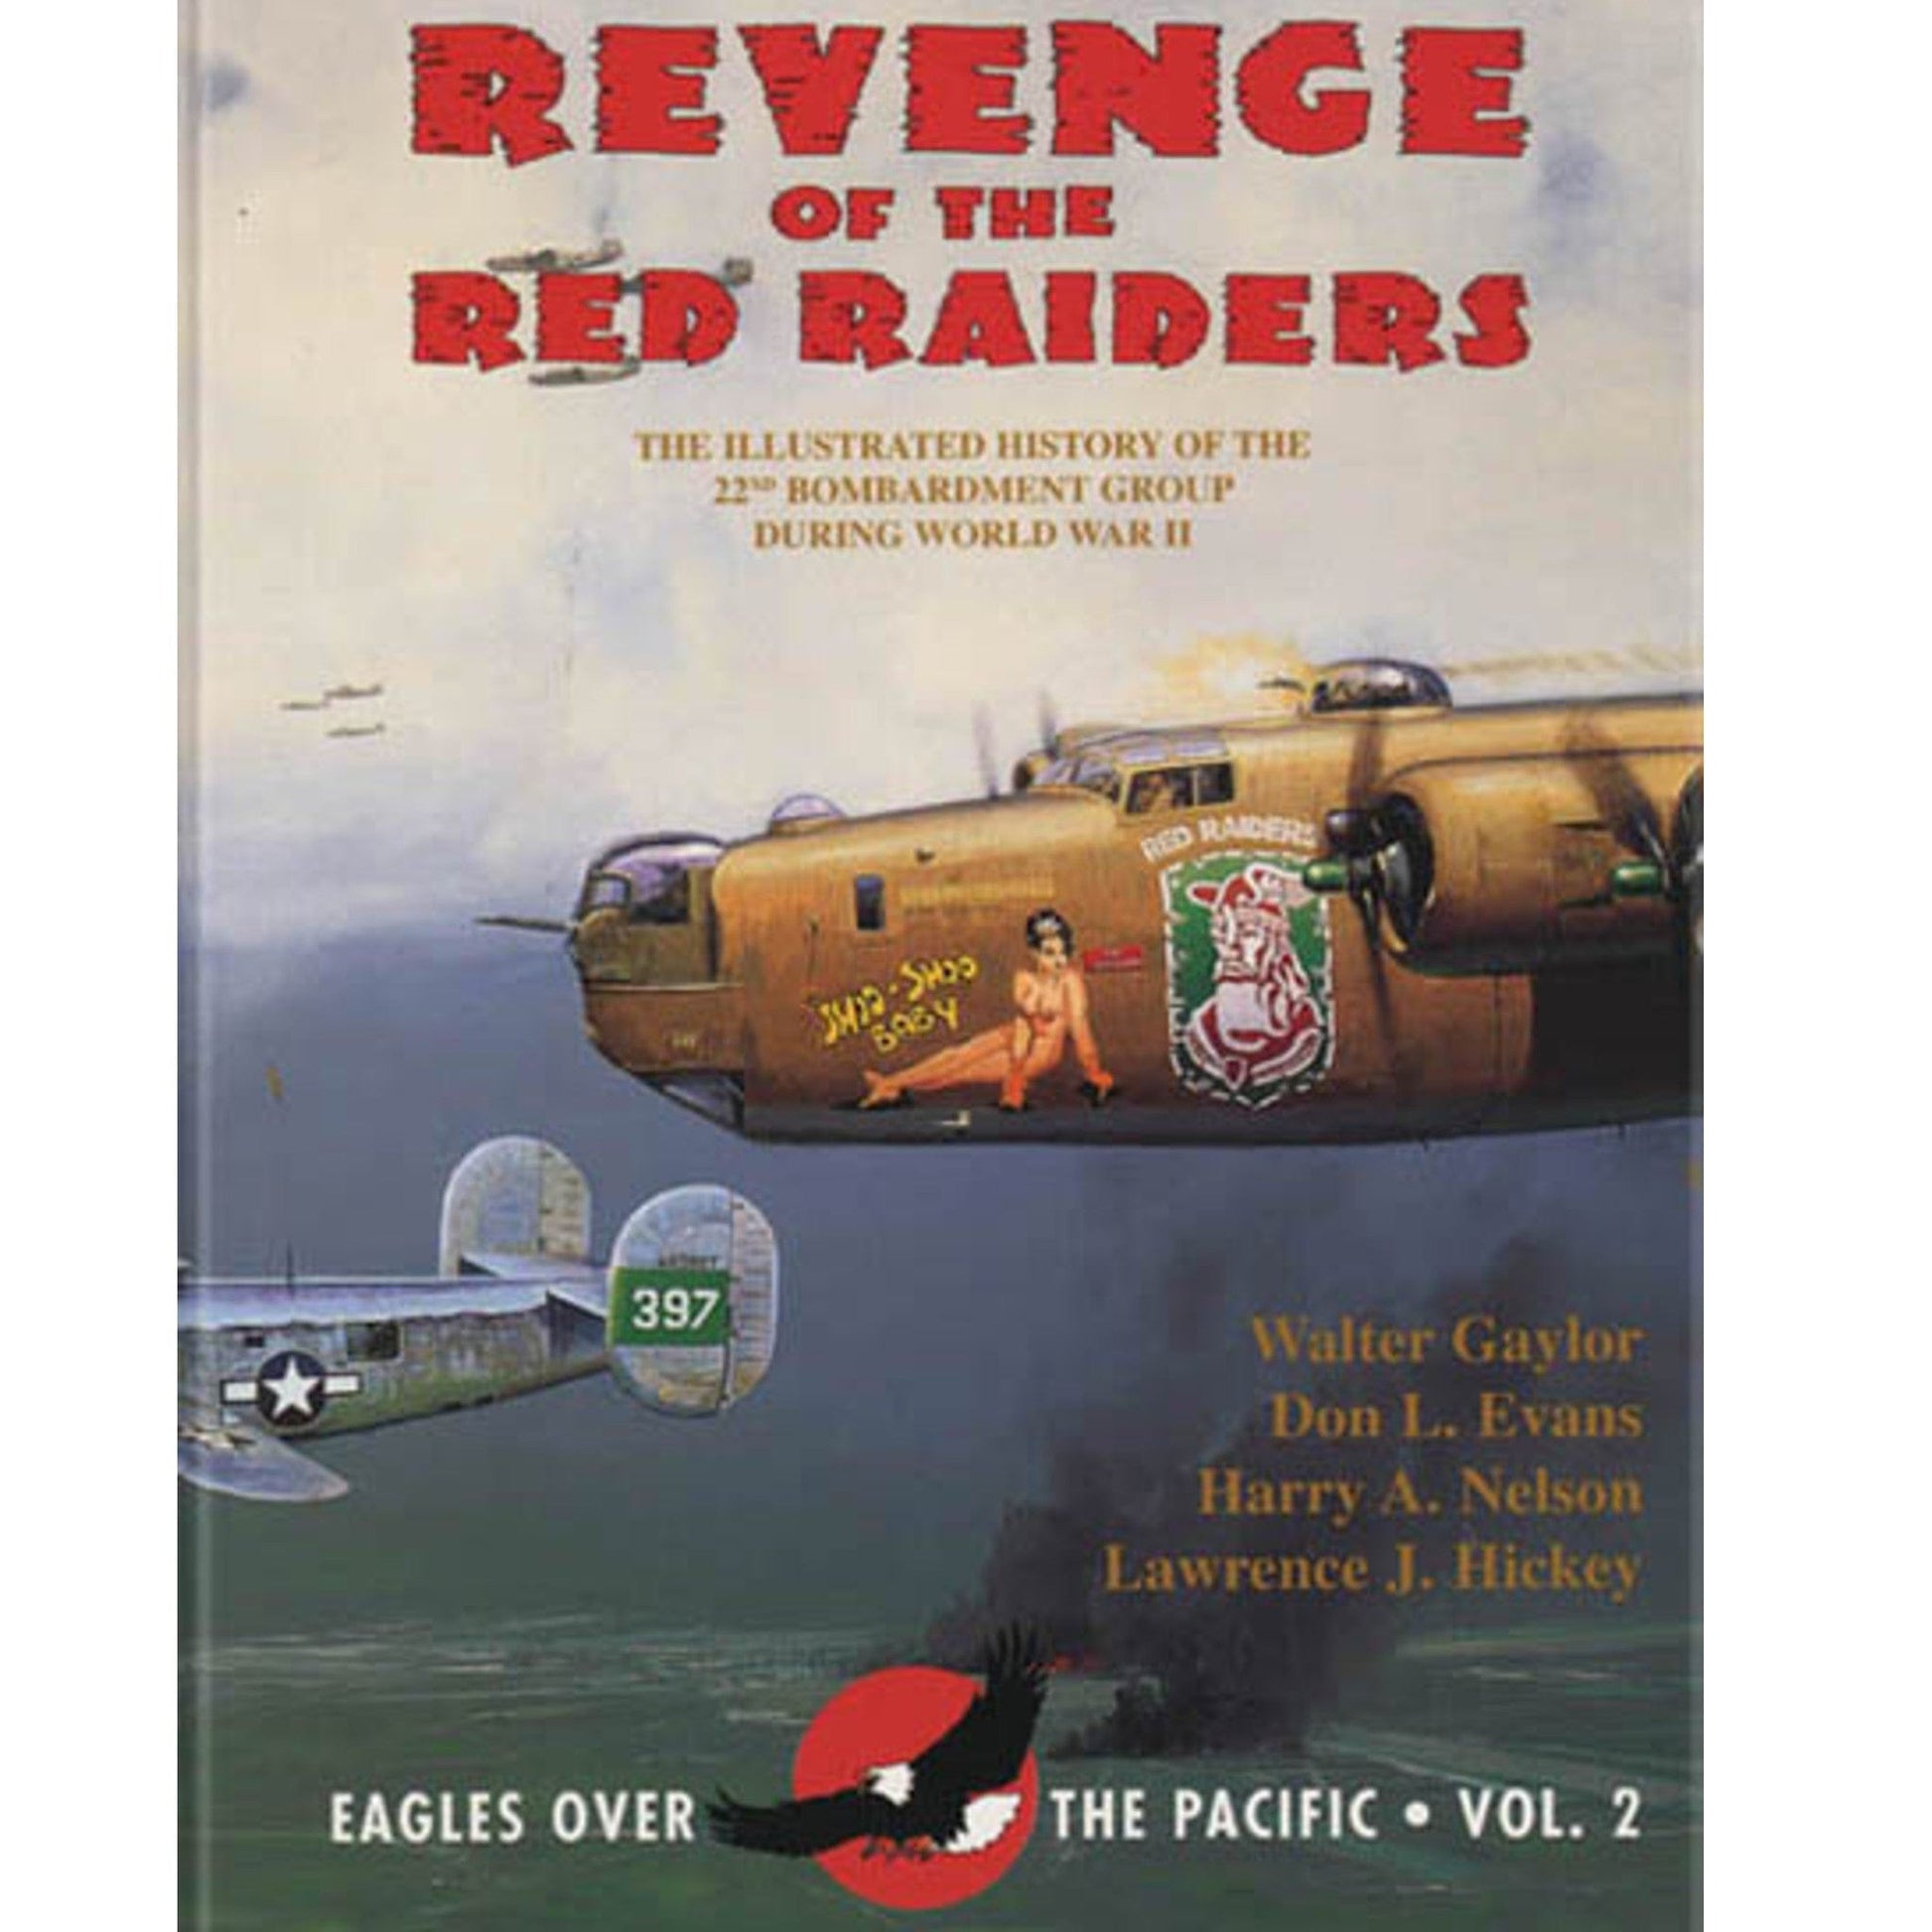 "Revenge of the Red Raiders" - by author Lawrence J. Hickey from The History List Store